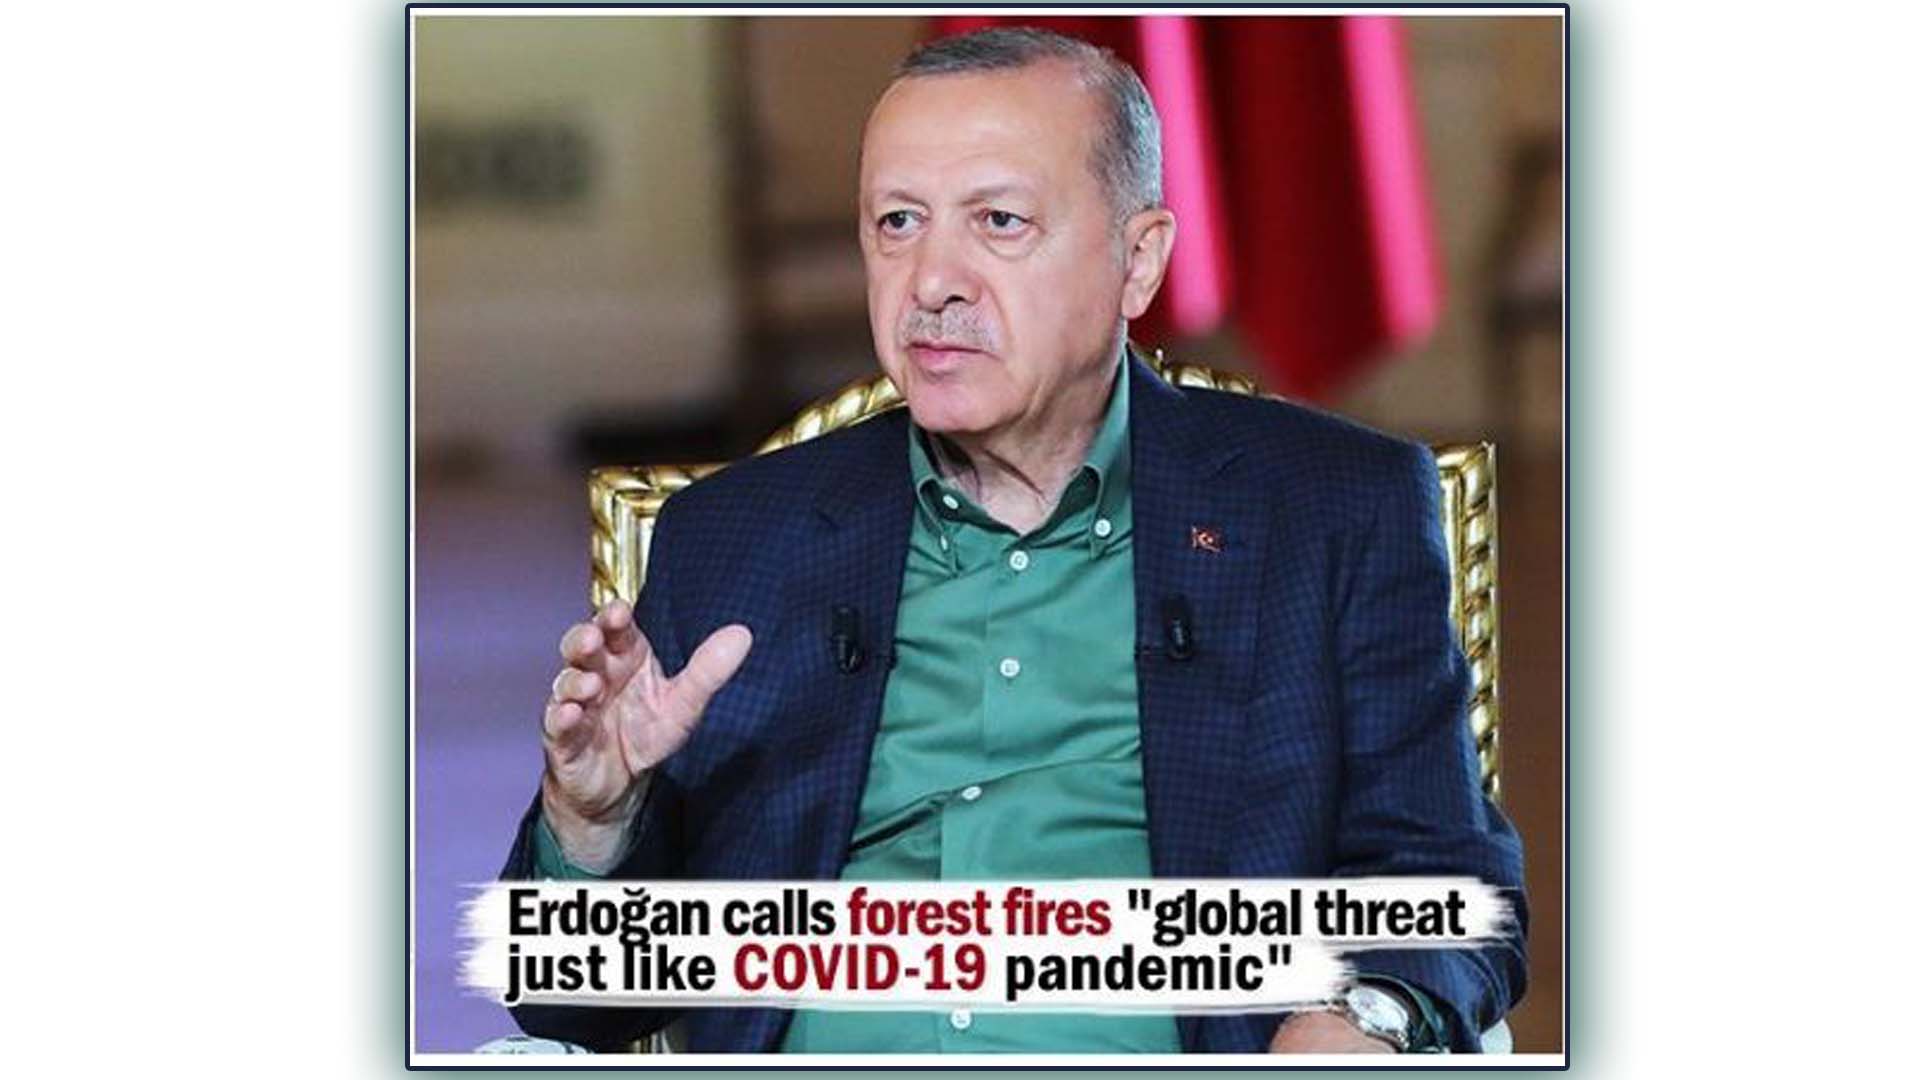 Erdoğan describes forest fires as "global threat just like COVID-19 pandemic"